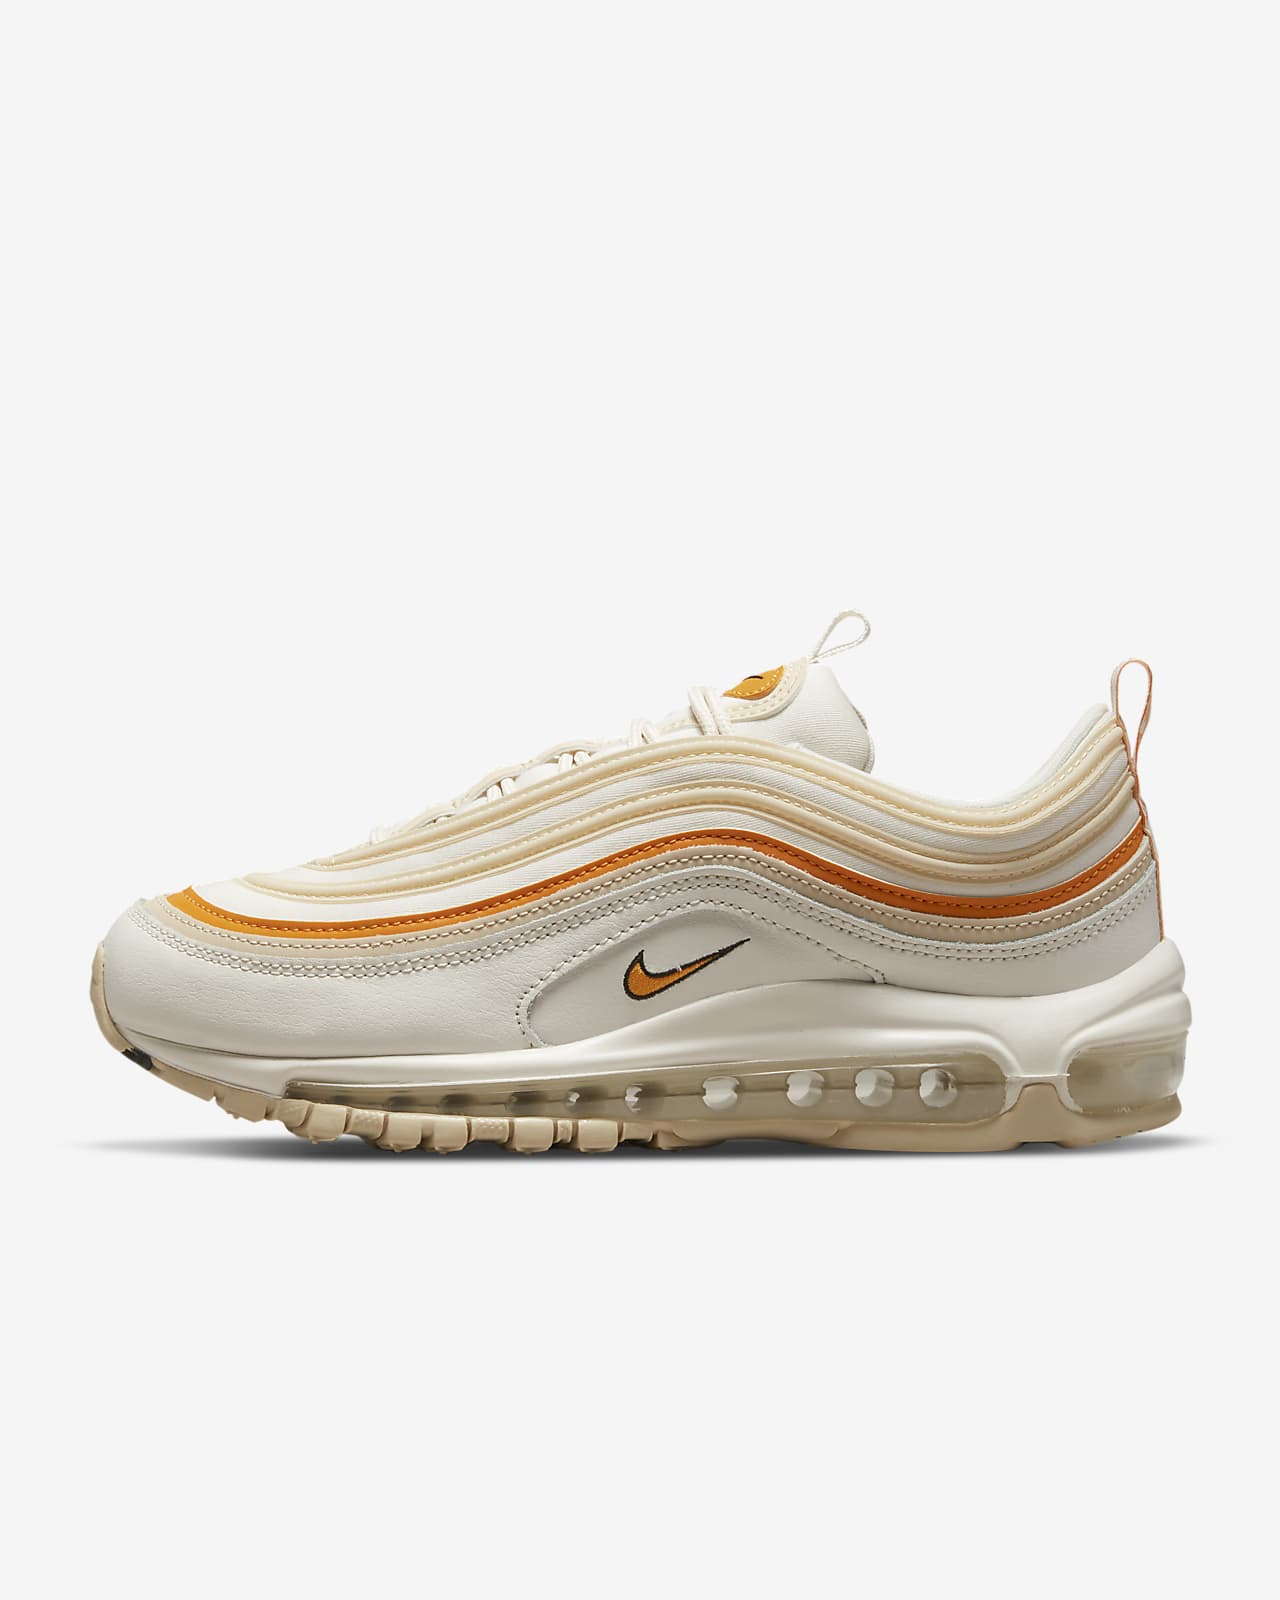 Nike Air Max 97 Women's Shoes افضل مزلق سيليكون